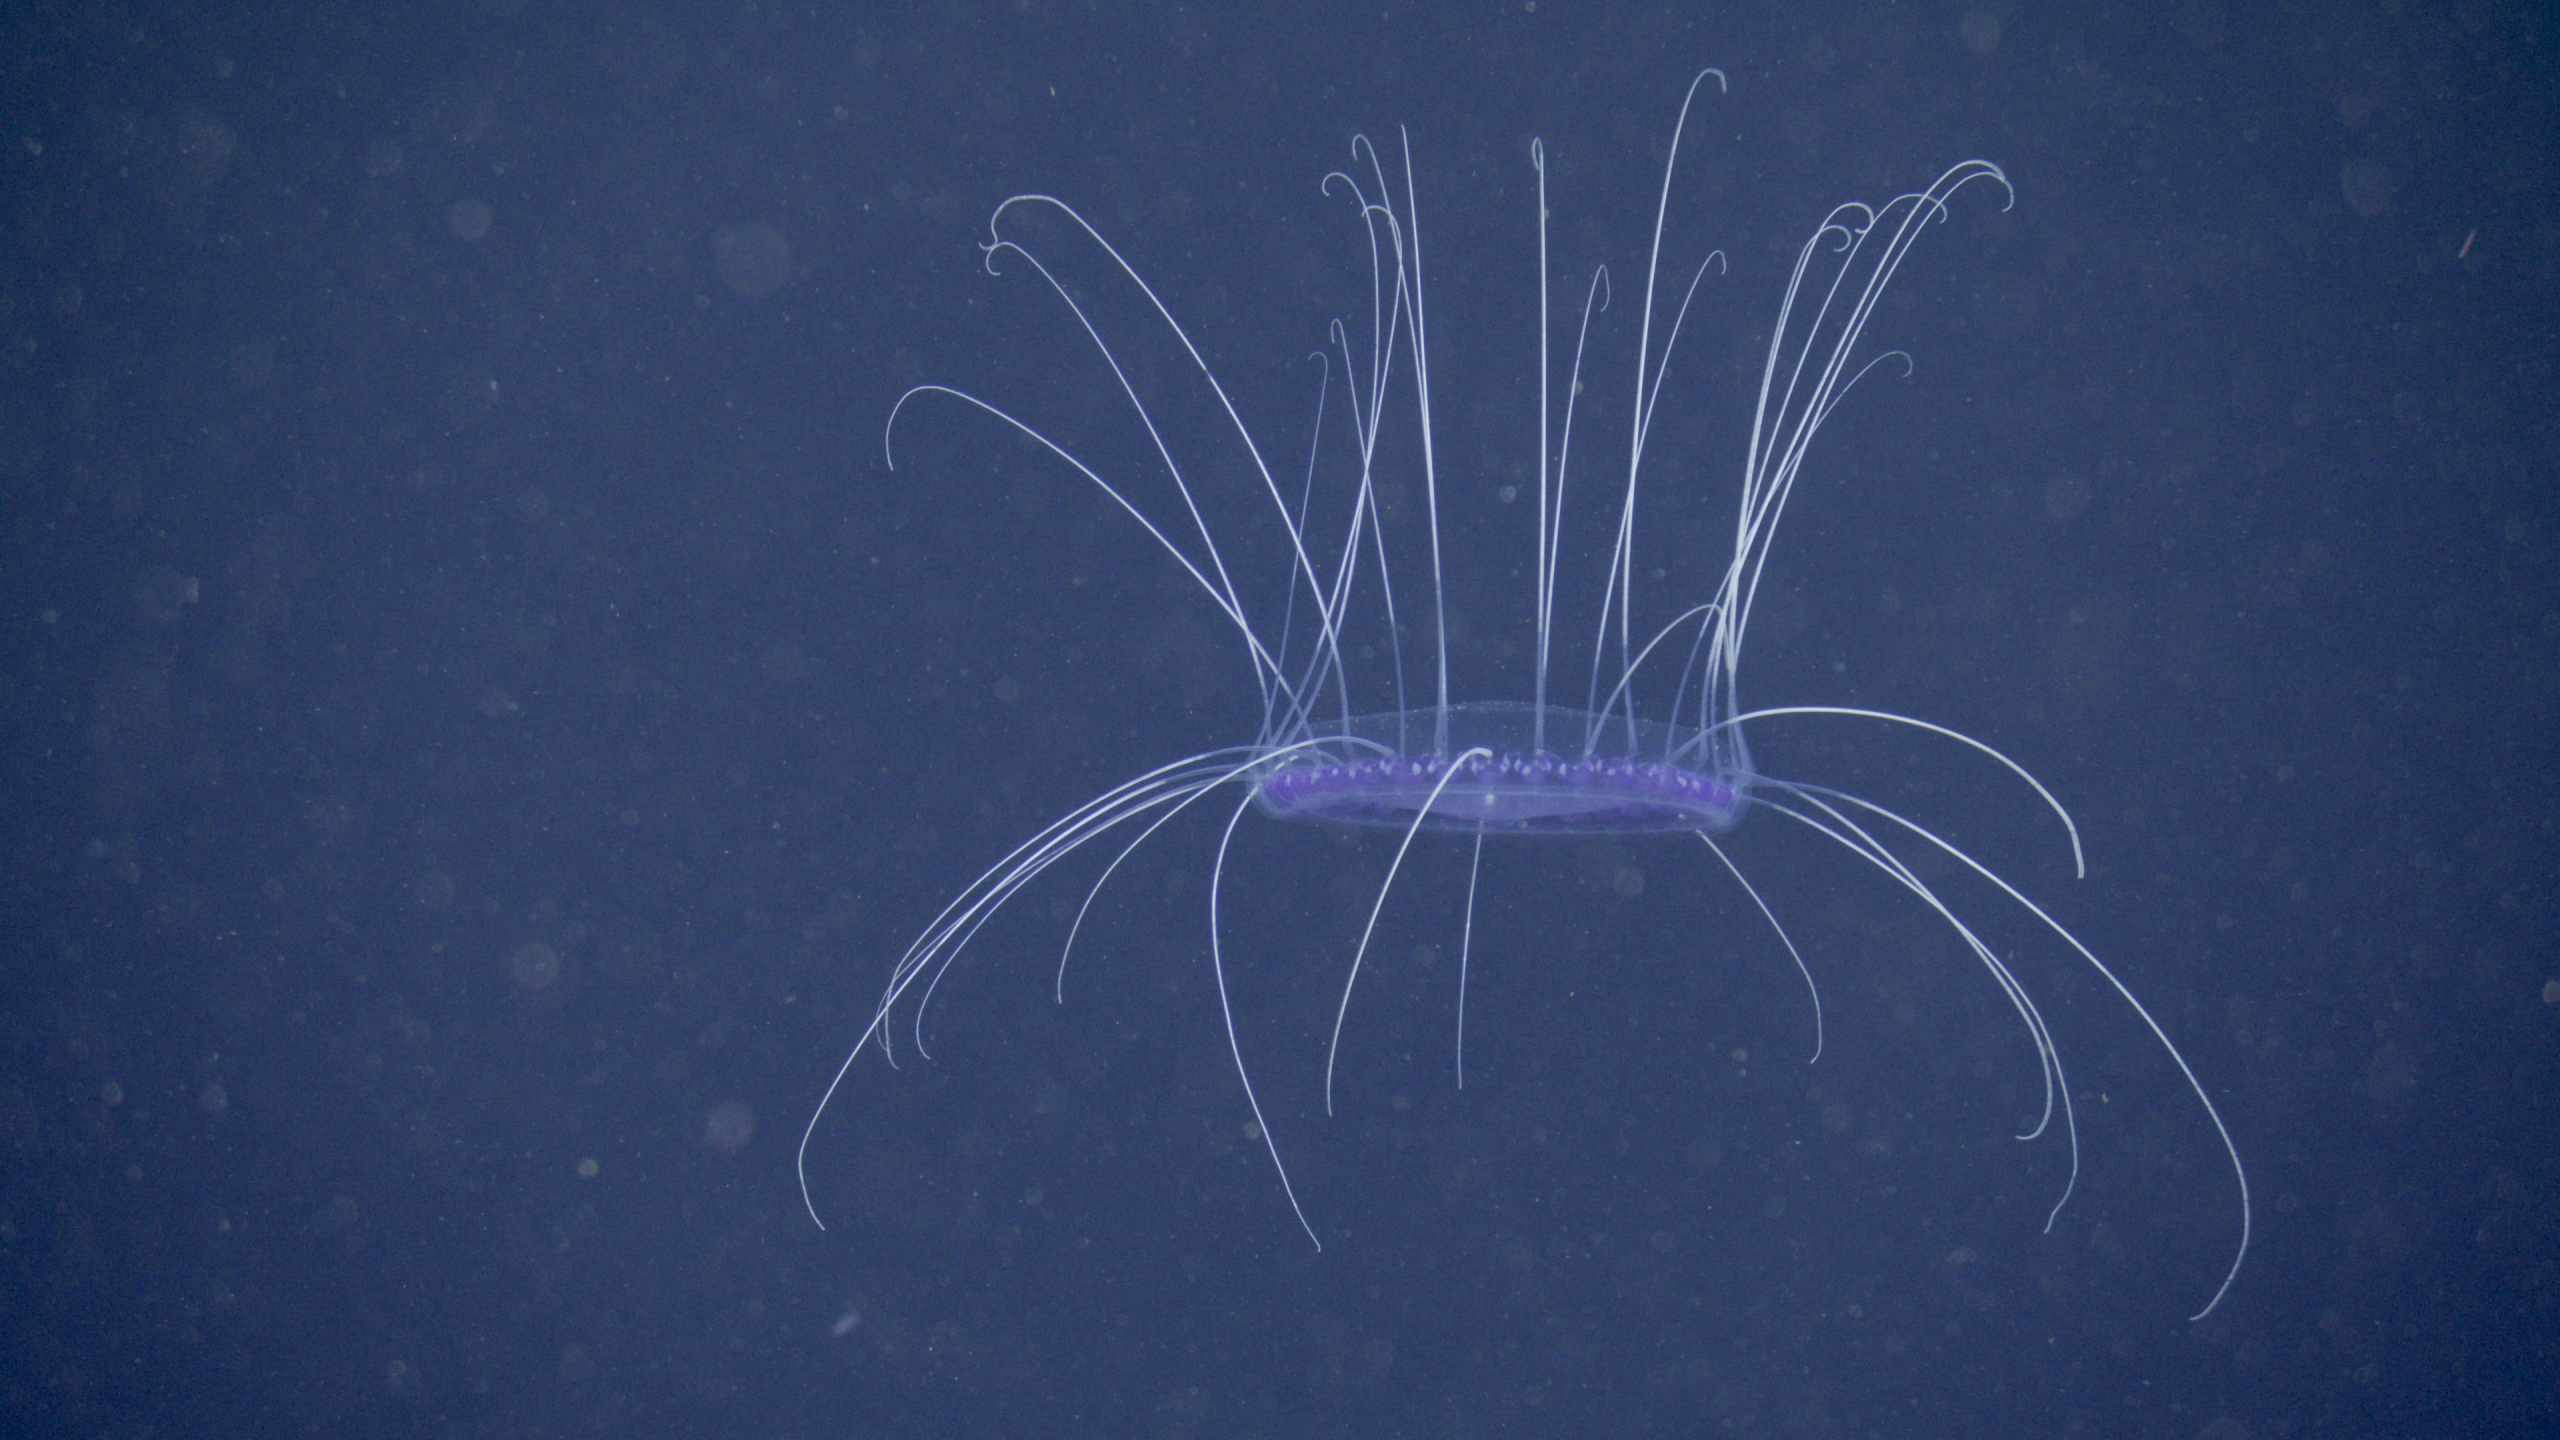 4K ultra high definition:A dinner plate jelly (Solmissus sp.) filmed in 4K ultra high definition (3840 x 2160 pixels). Image: © 2021 MBARI